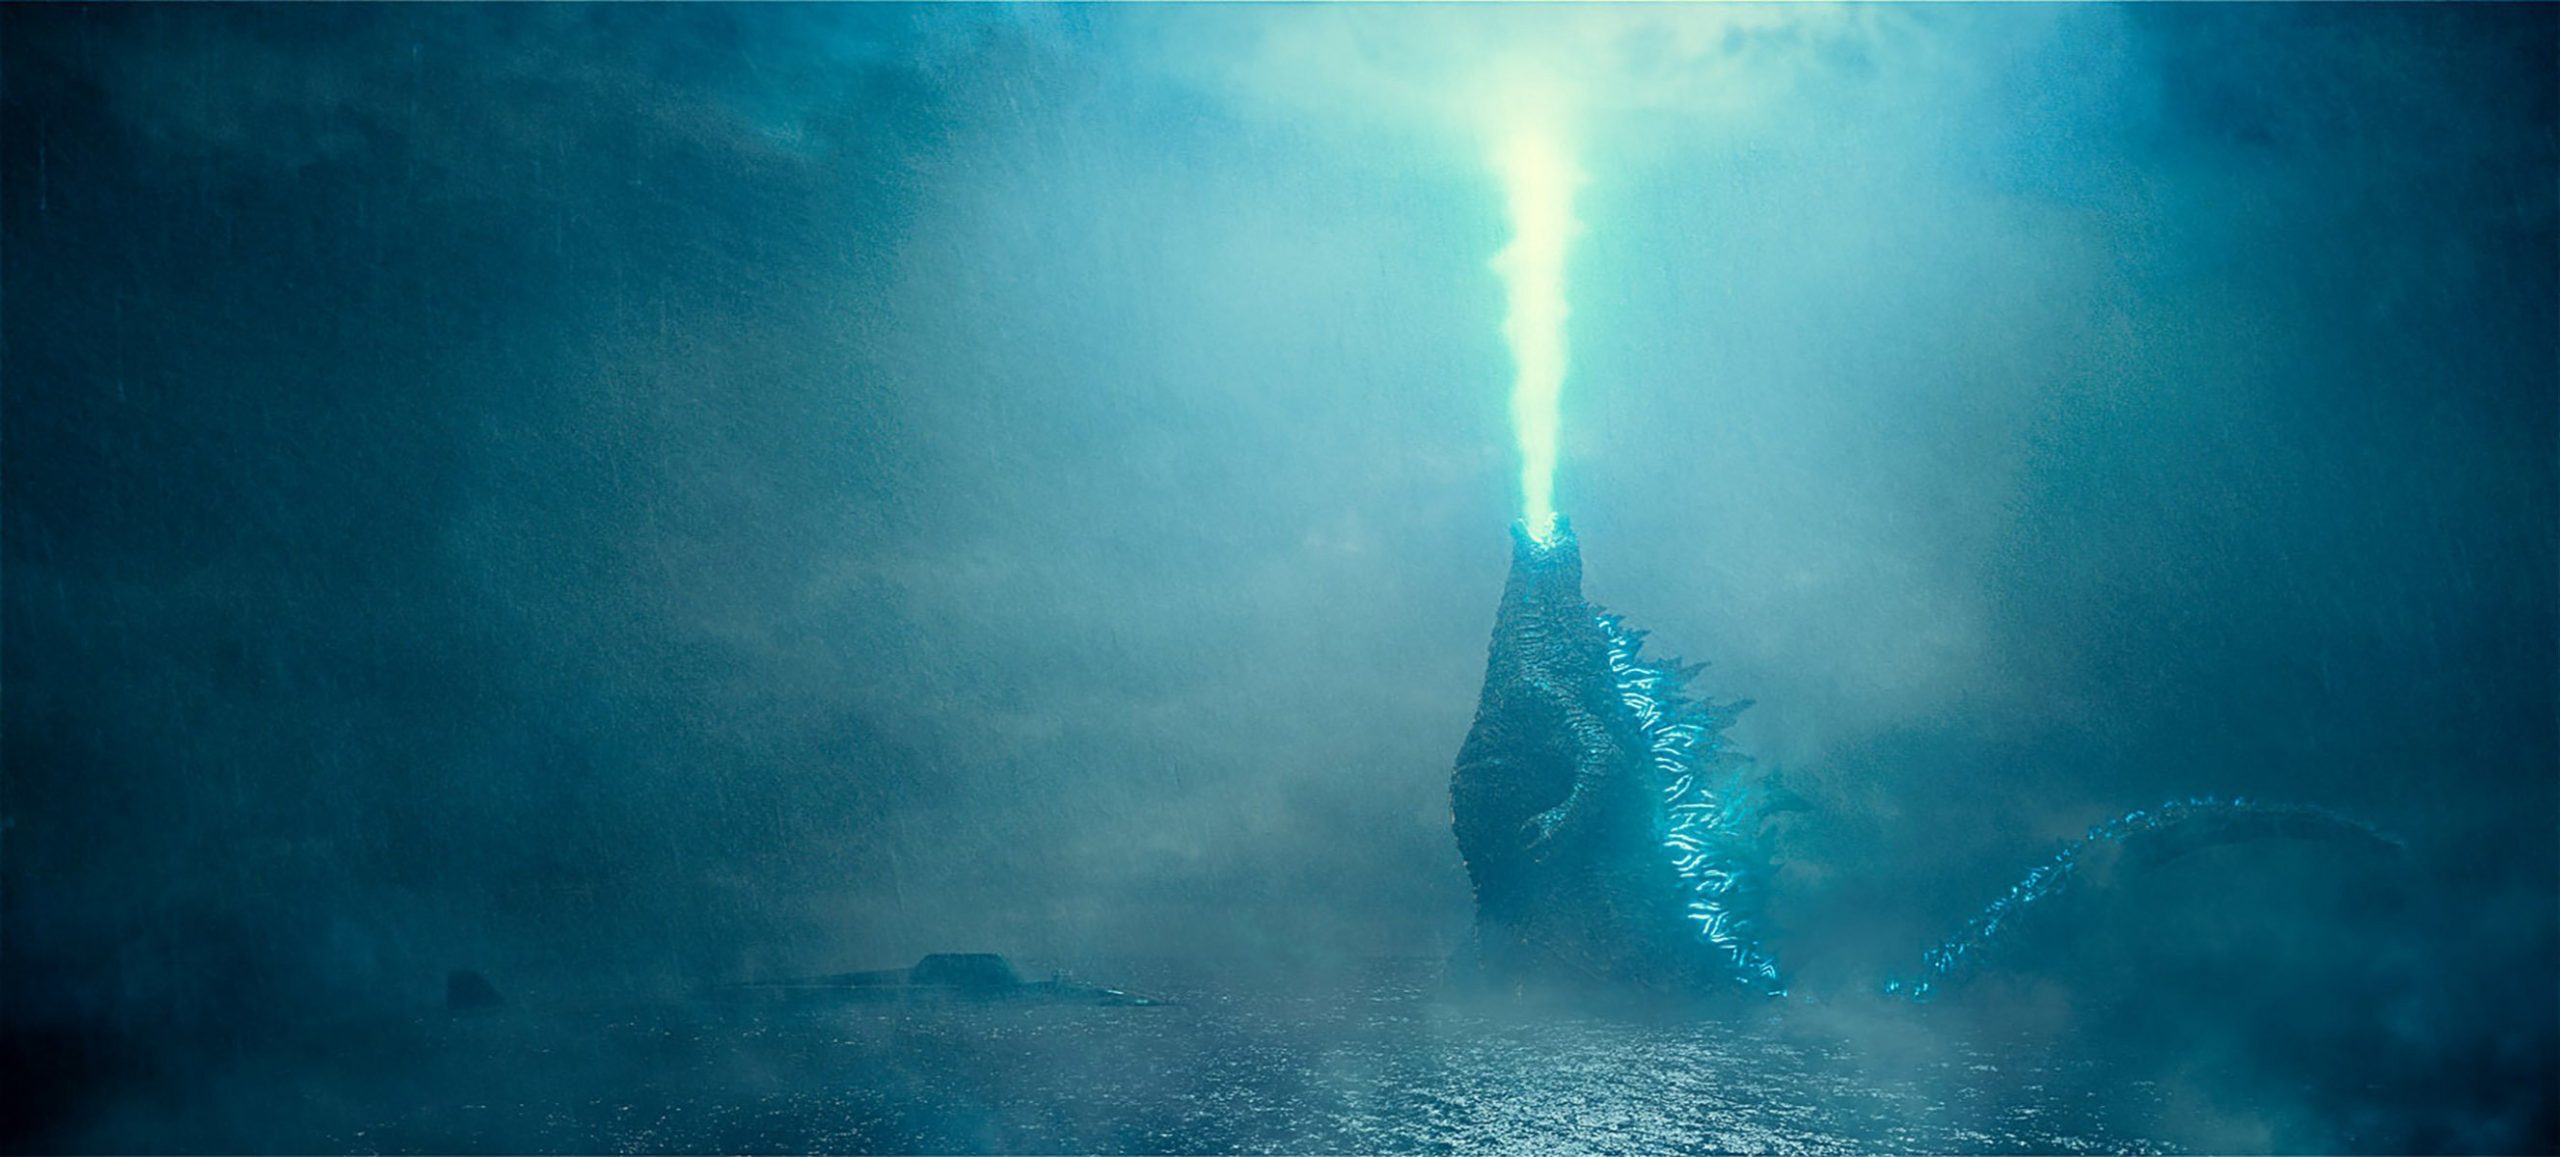 Godzilla King of The Monsters